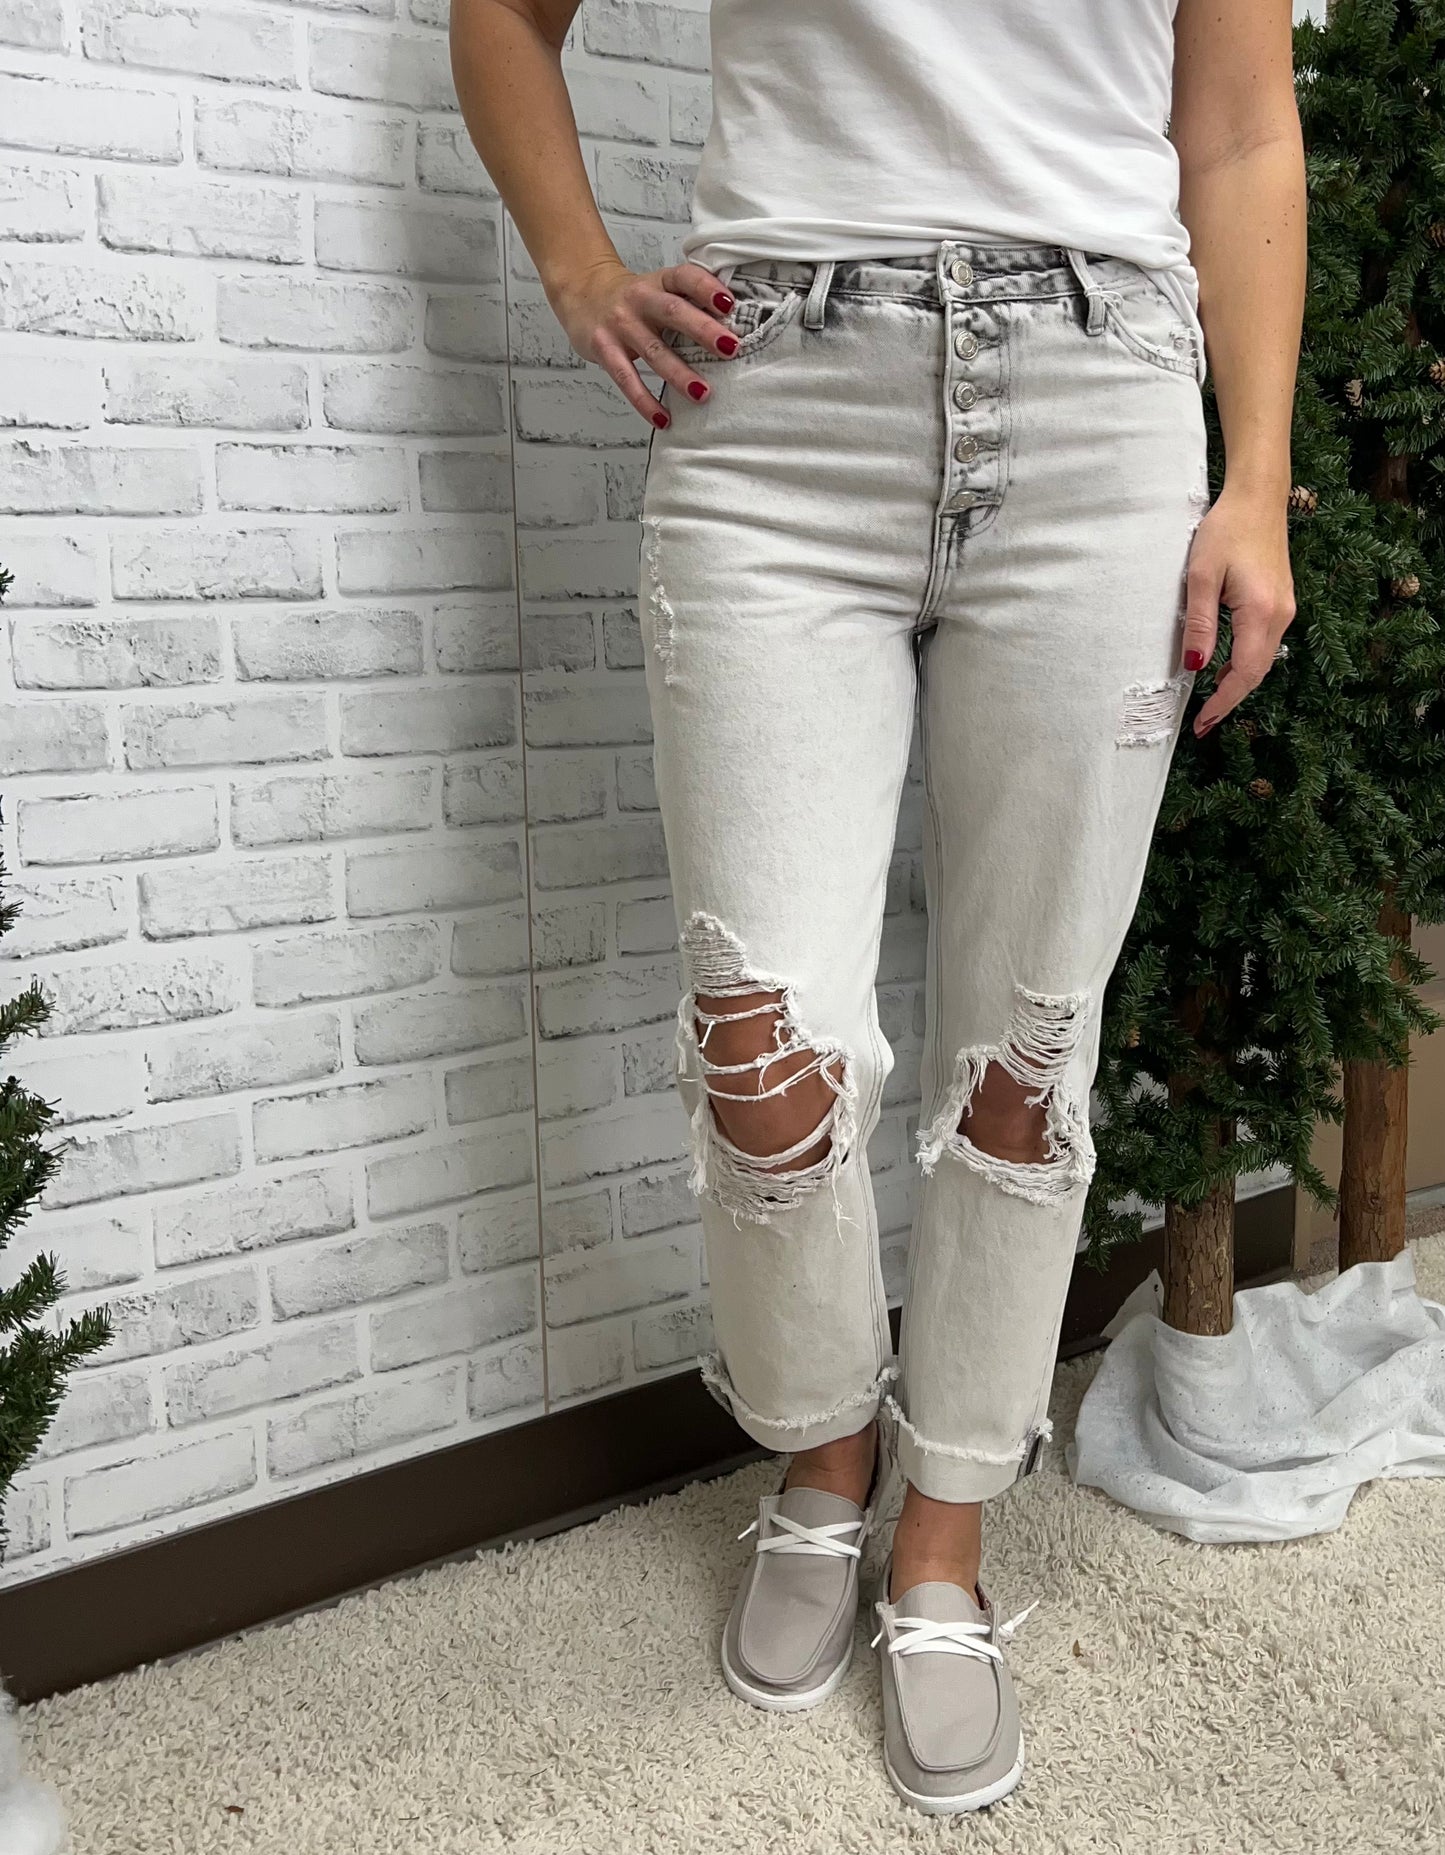 The Mineral Wash Distressed Jeans